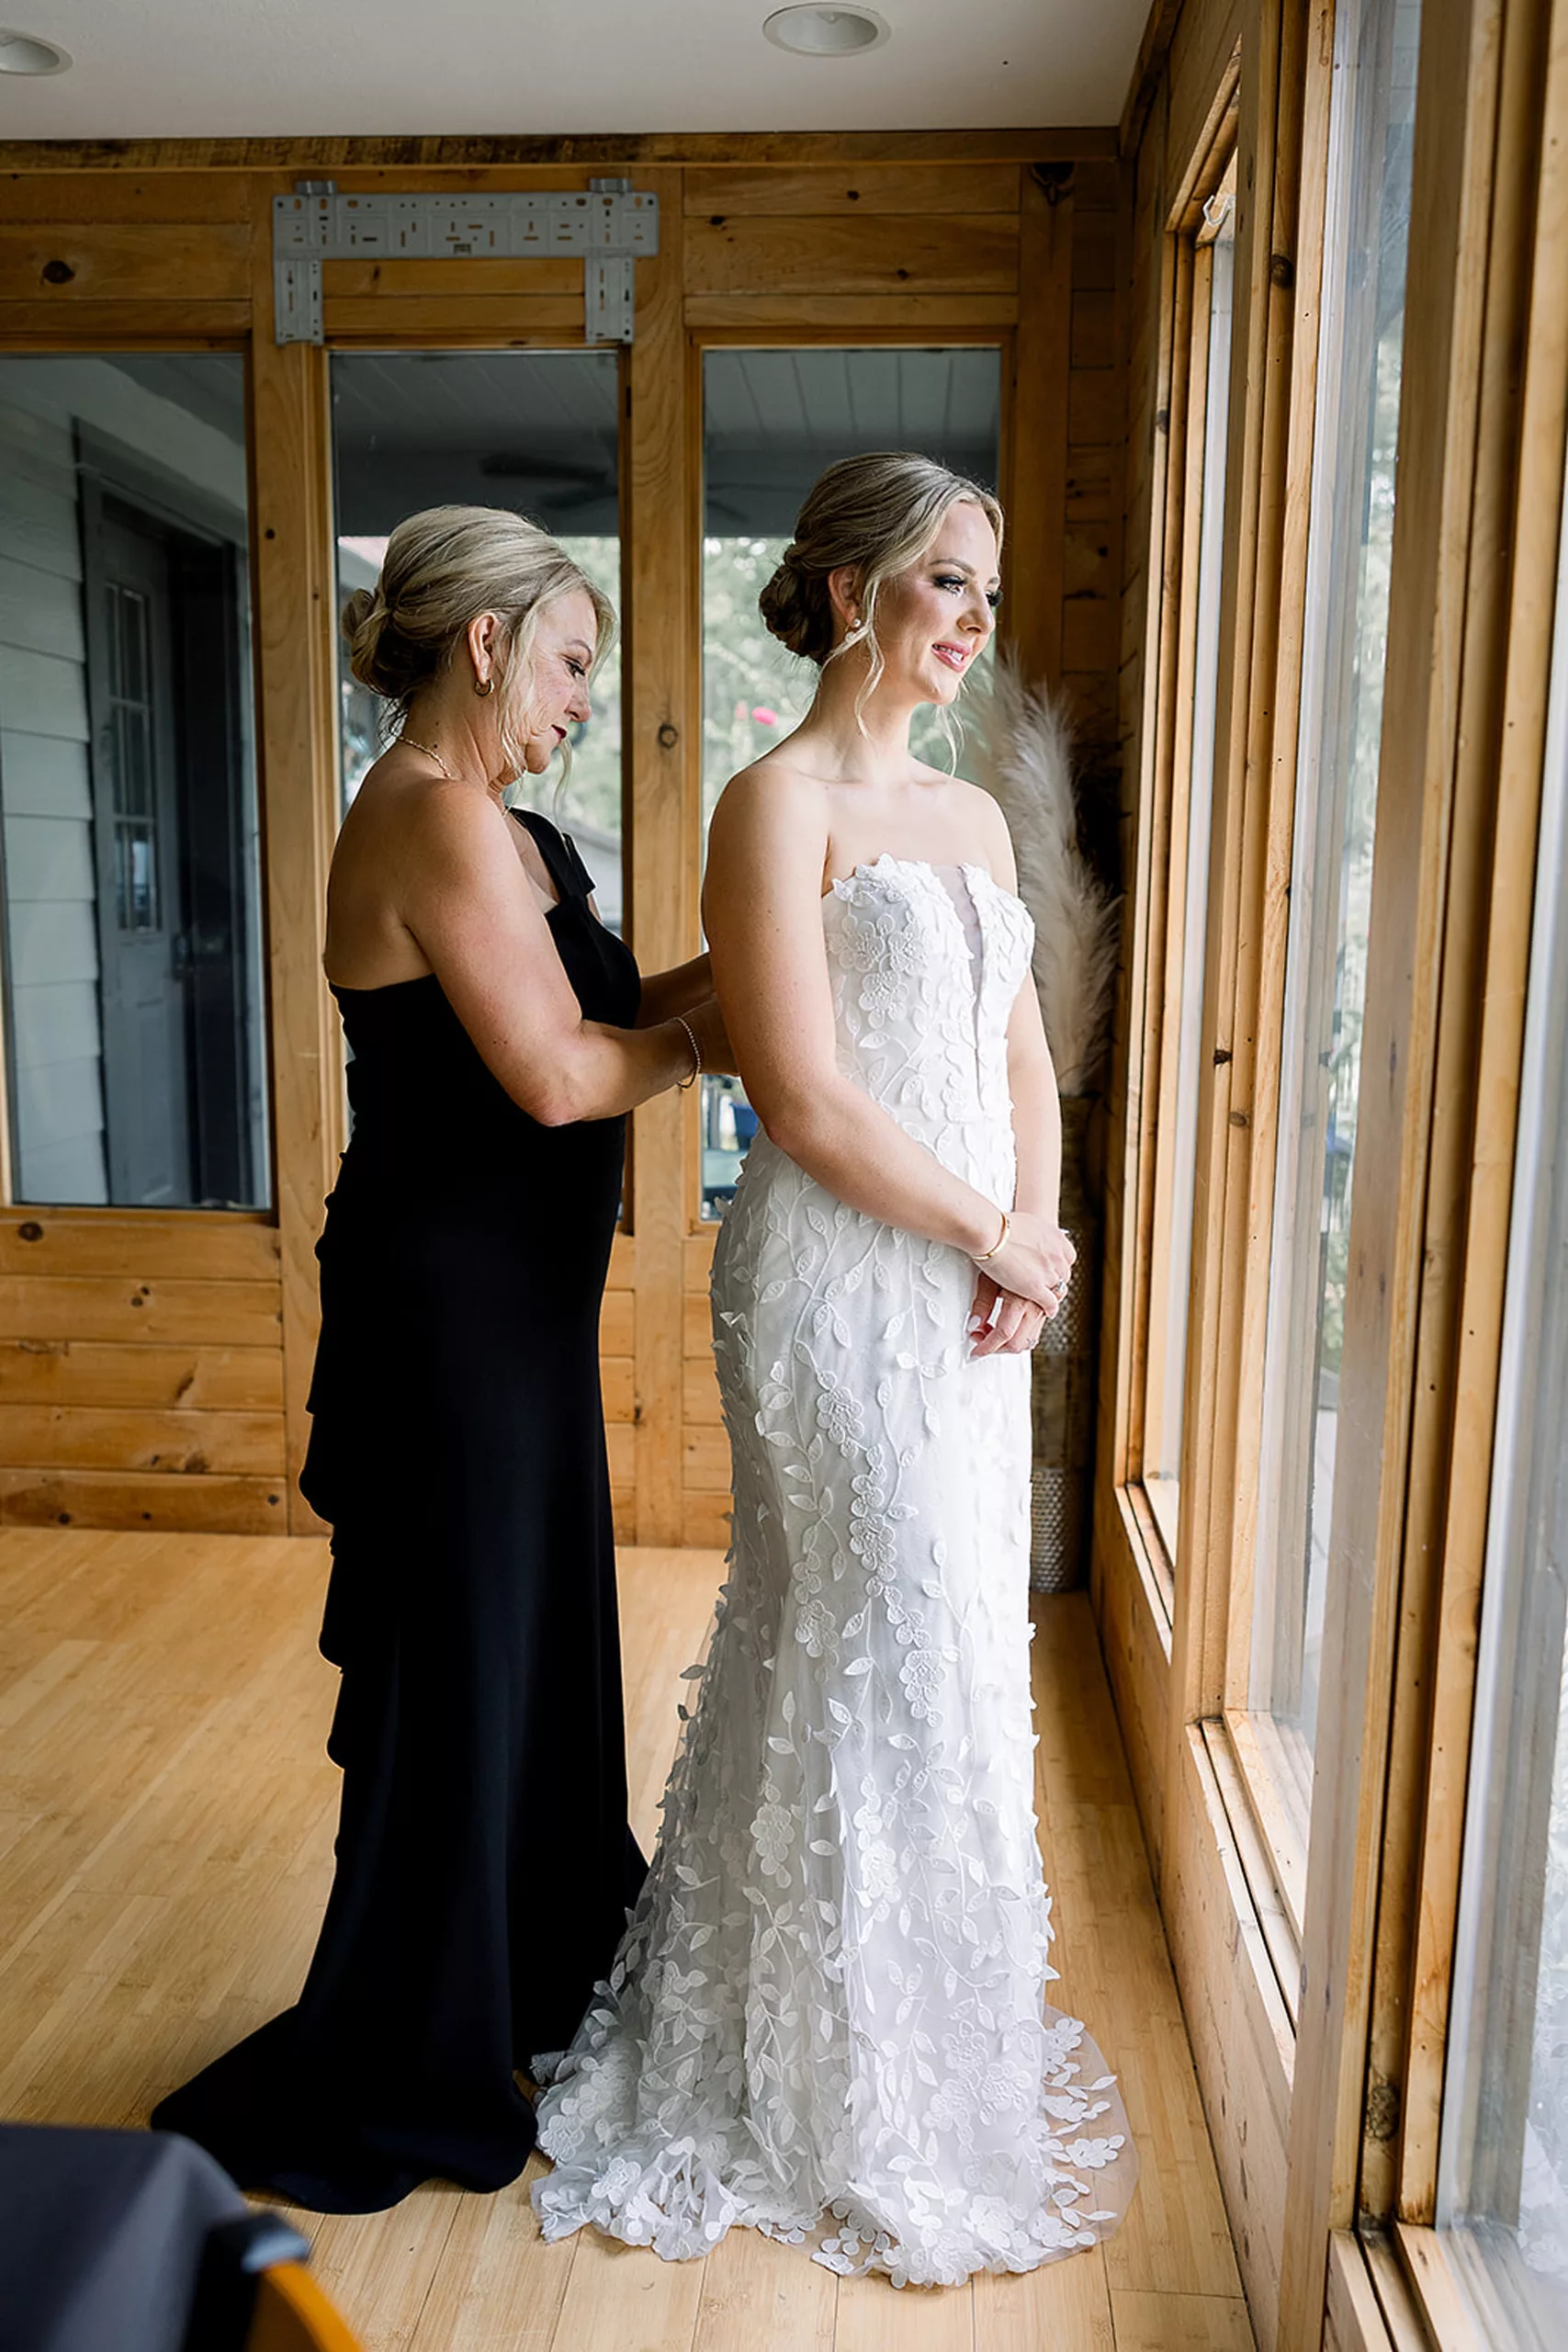 A bride stands in a window as her mother in a black dress buttons up her dress